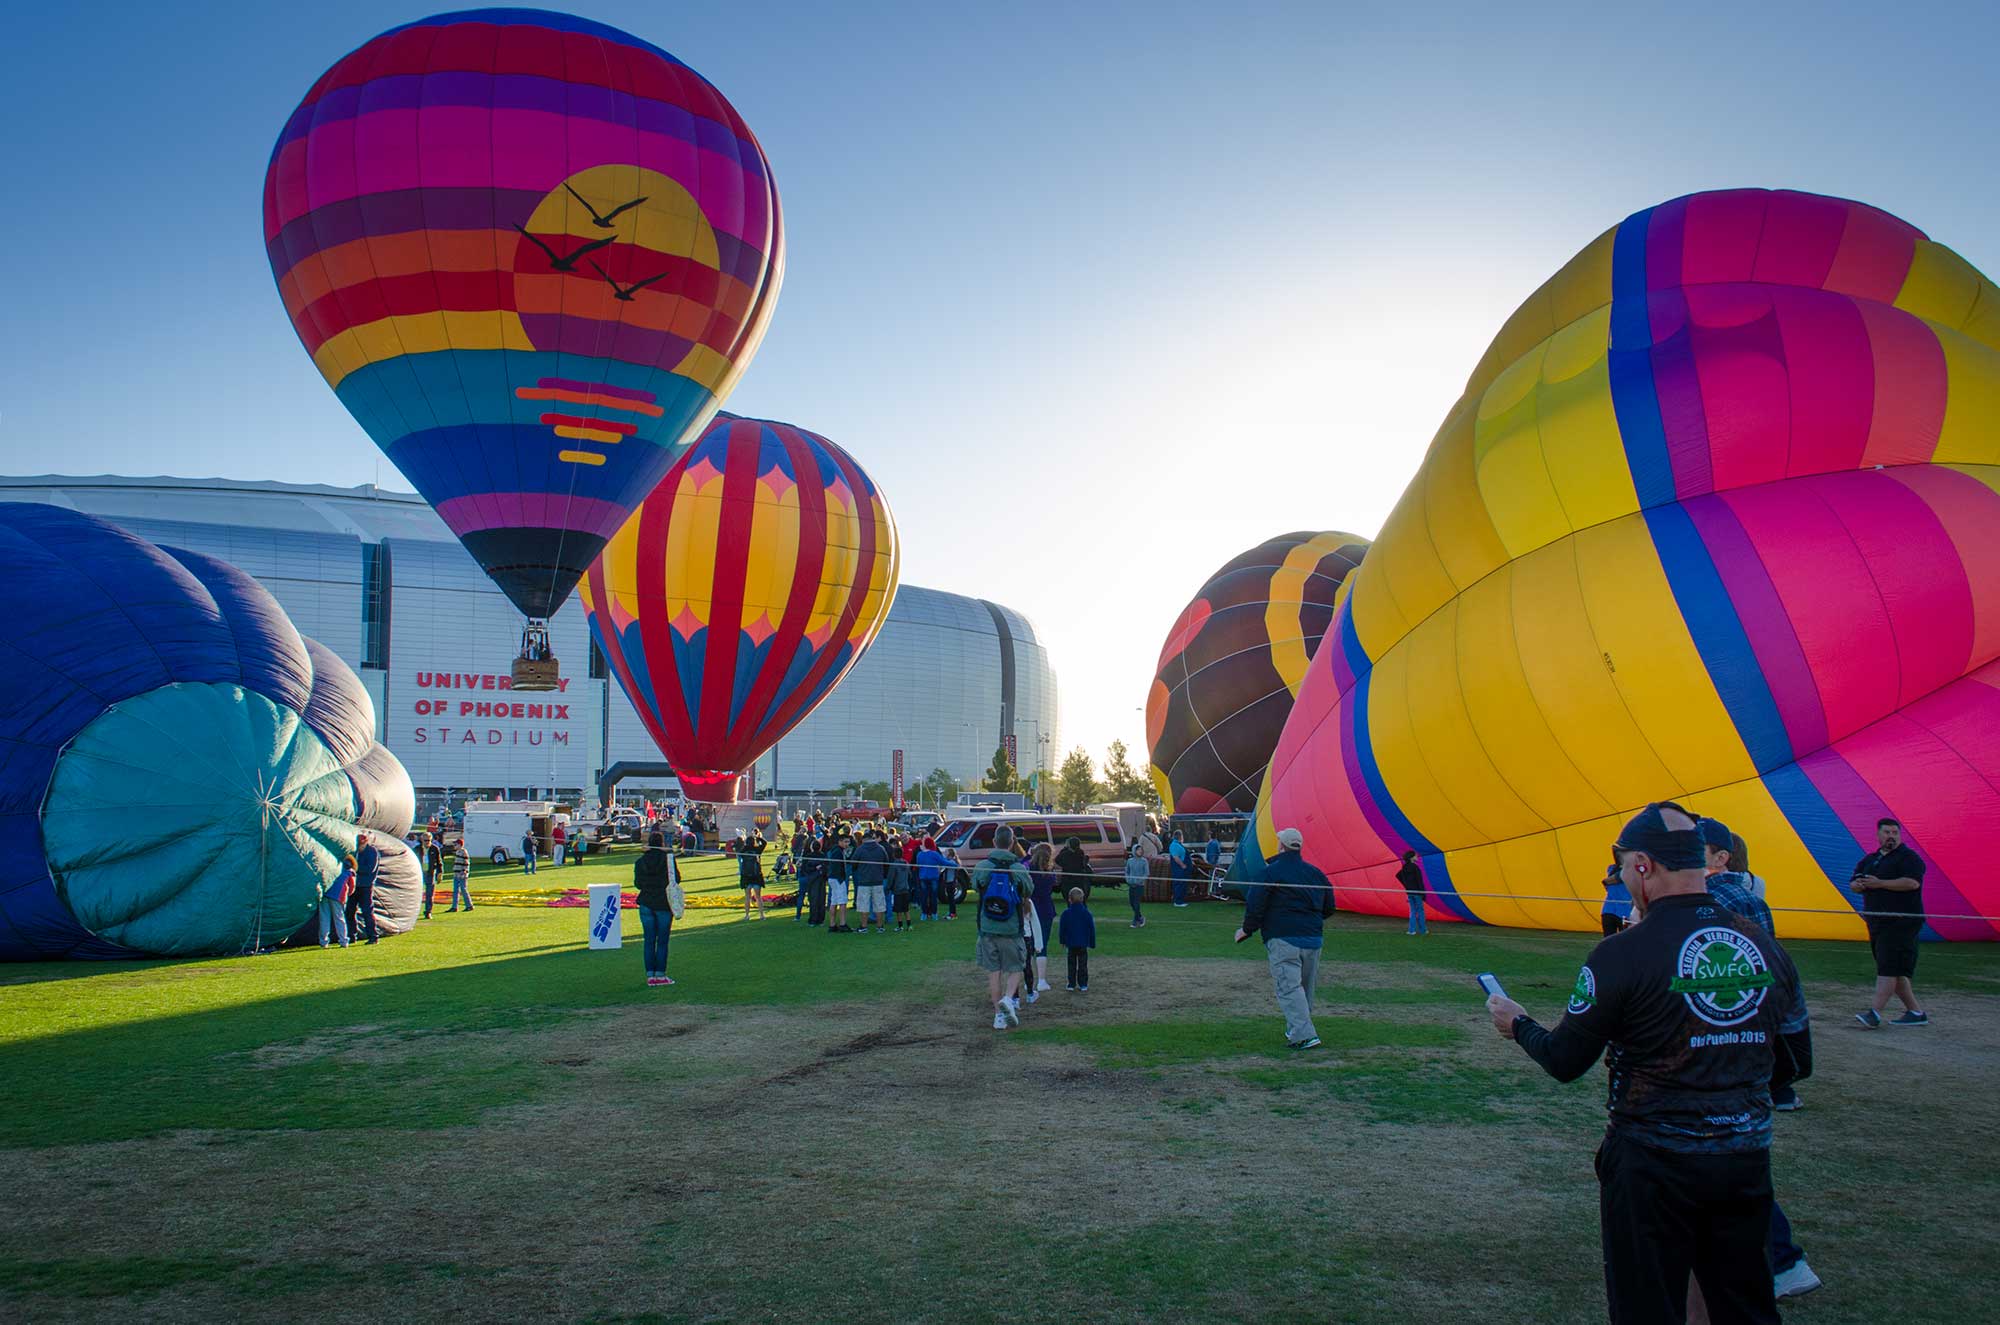 The Out West Balloon Fest